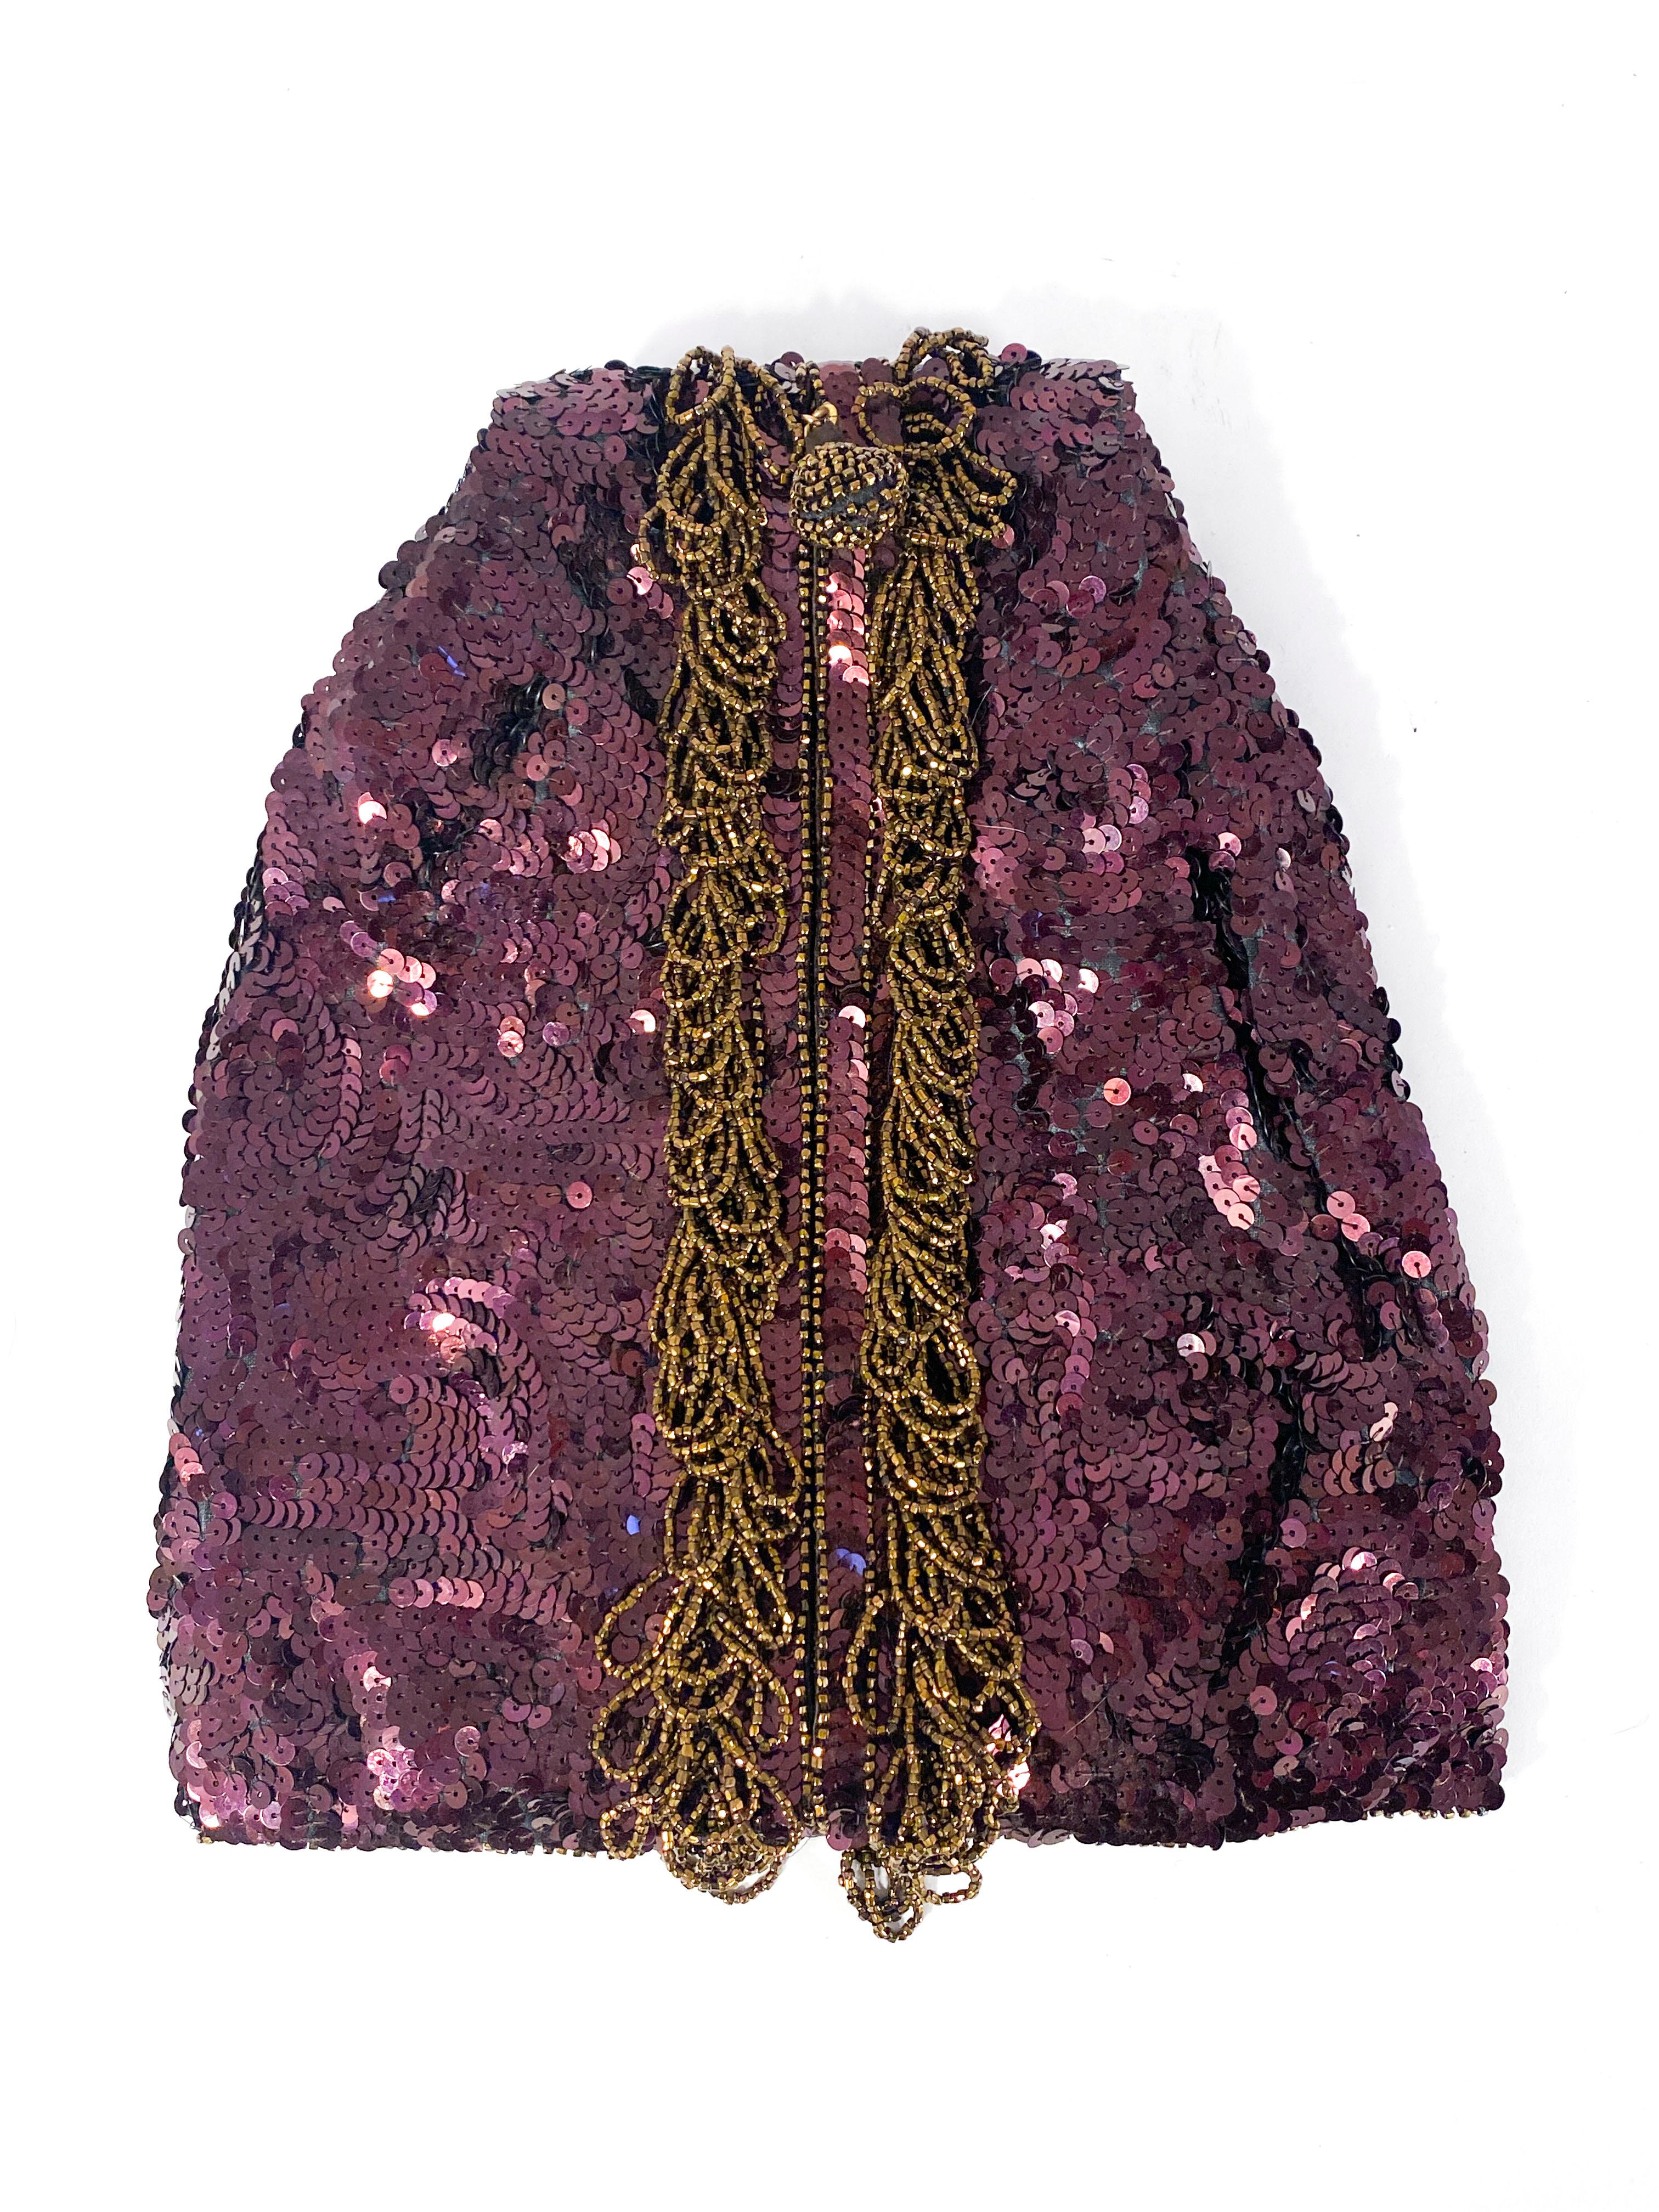 1940s Koret Maroon Sequin Evening Arm Bag In Good Condition For Sale In San Francisco, CA